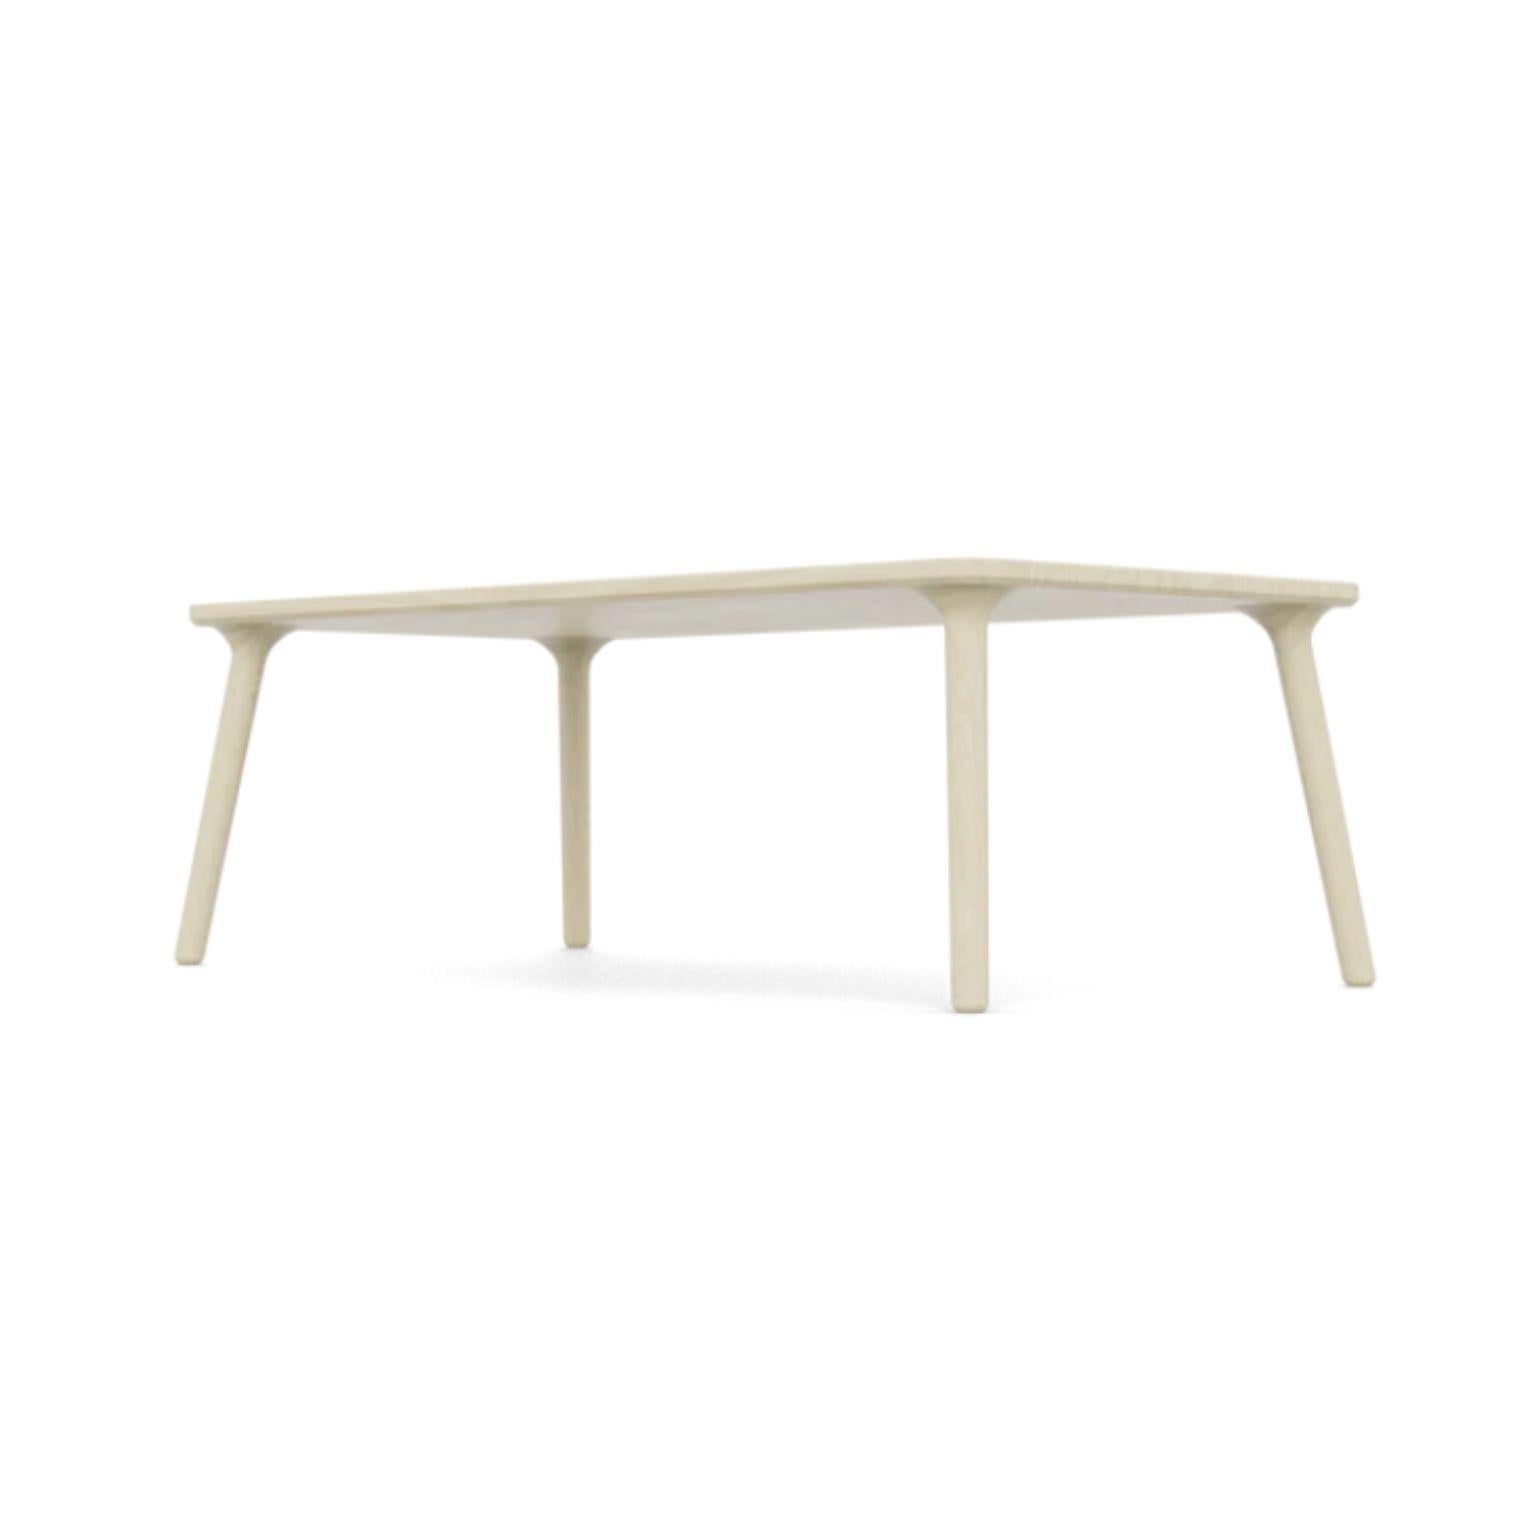 American White Ash Coffee Table Mod 2 by Fernweh Woodworking